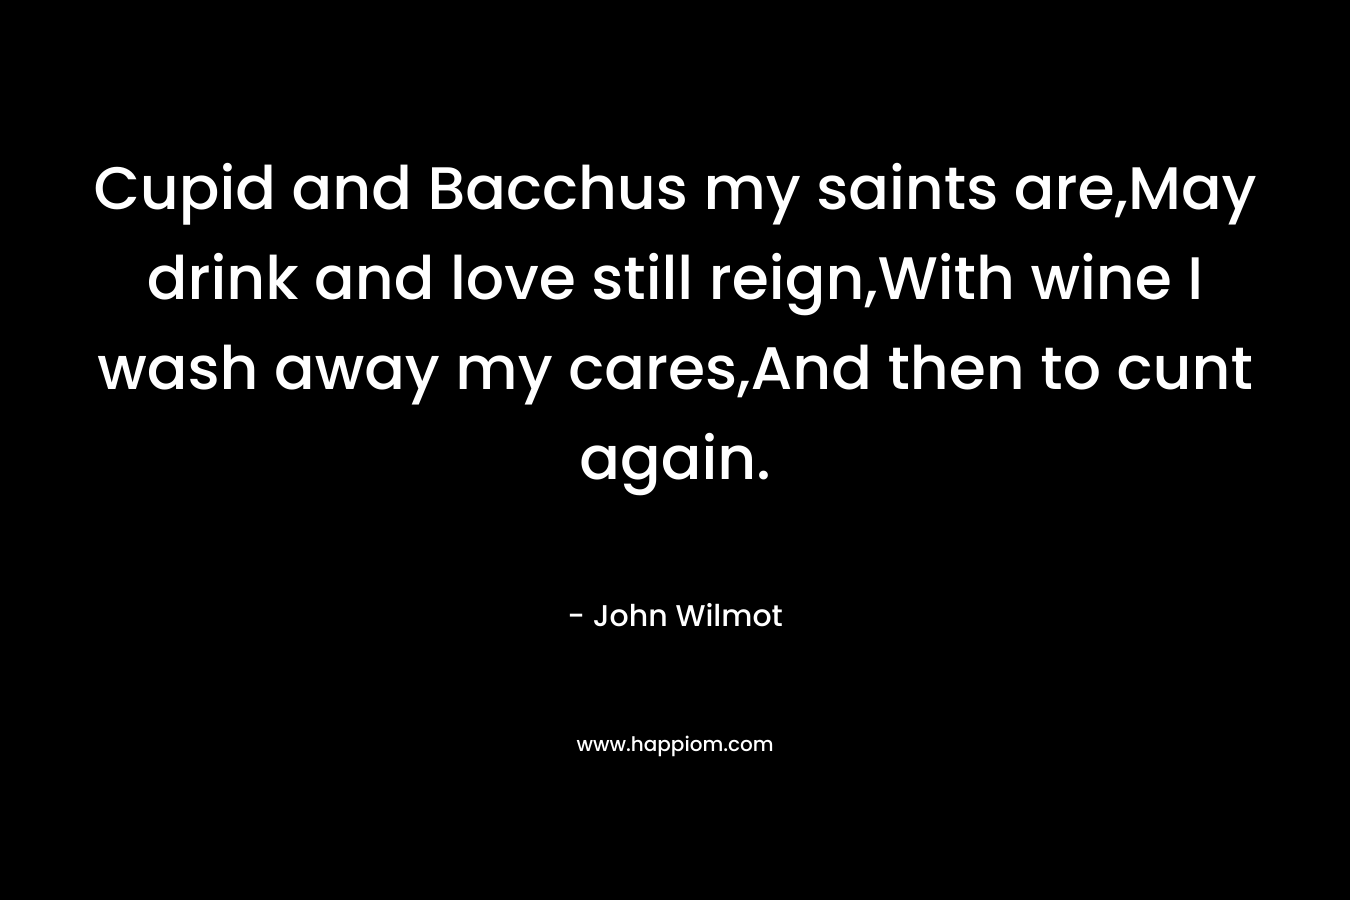 Cupid and Bacchus my saints are,May drink and love still reign,With wine I wash away my cares,And then to cunt again. – John Wilmot